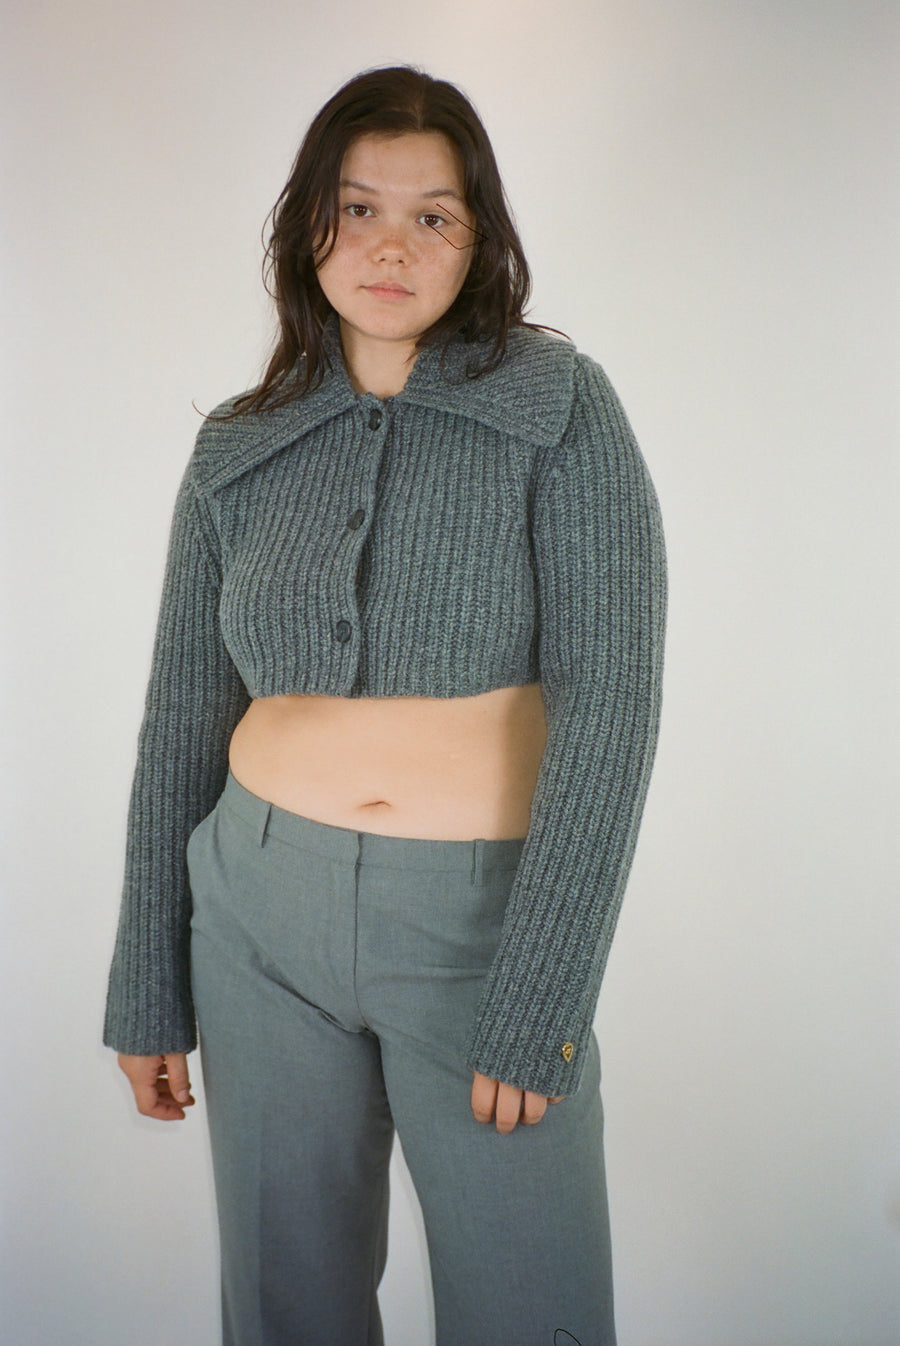 Cropped cardigan sweater in grey with button closure on model